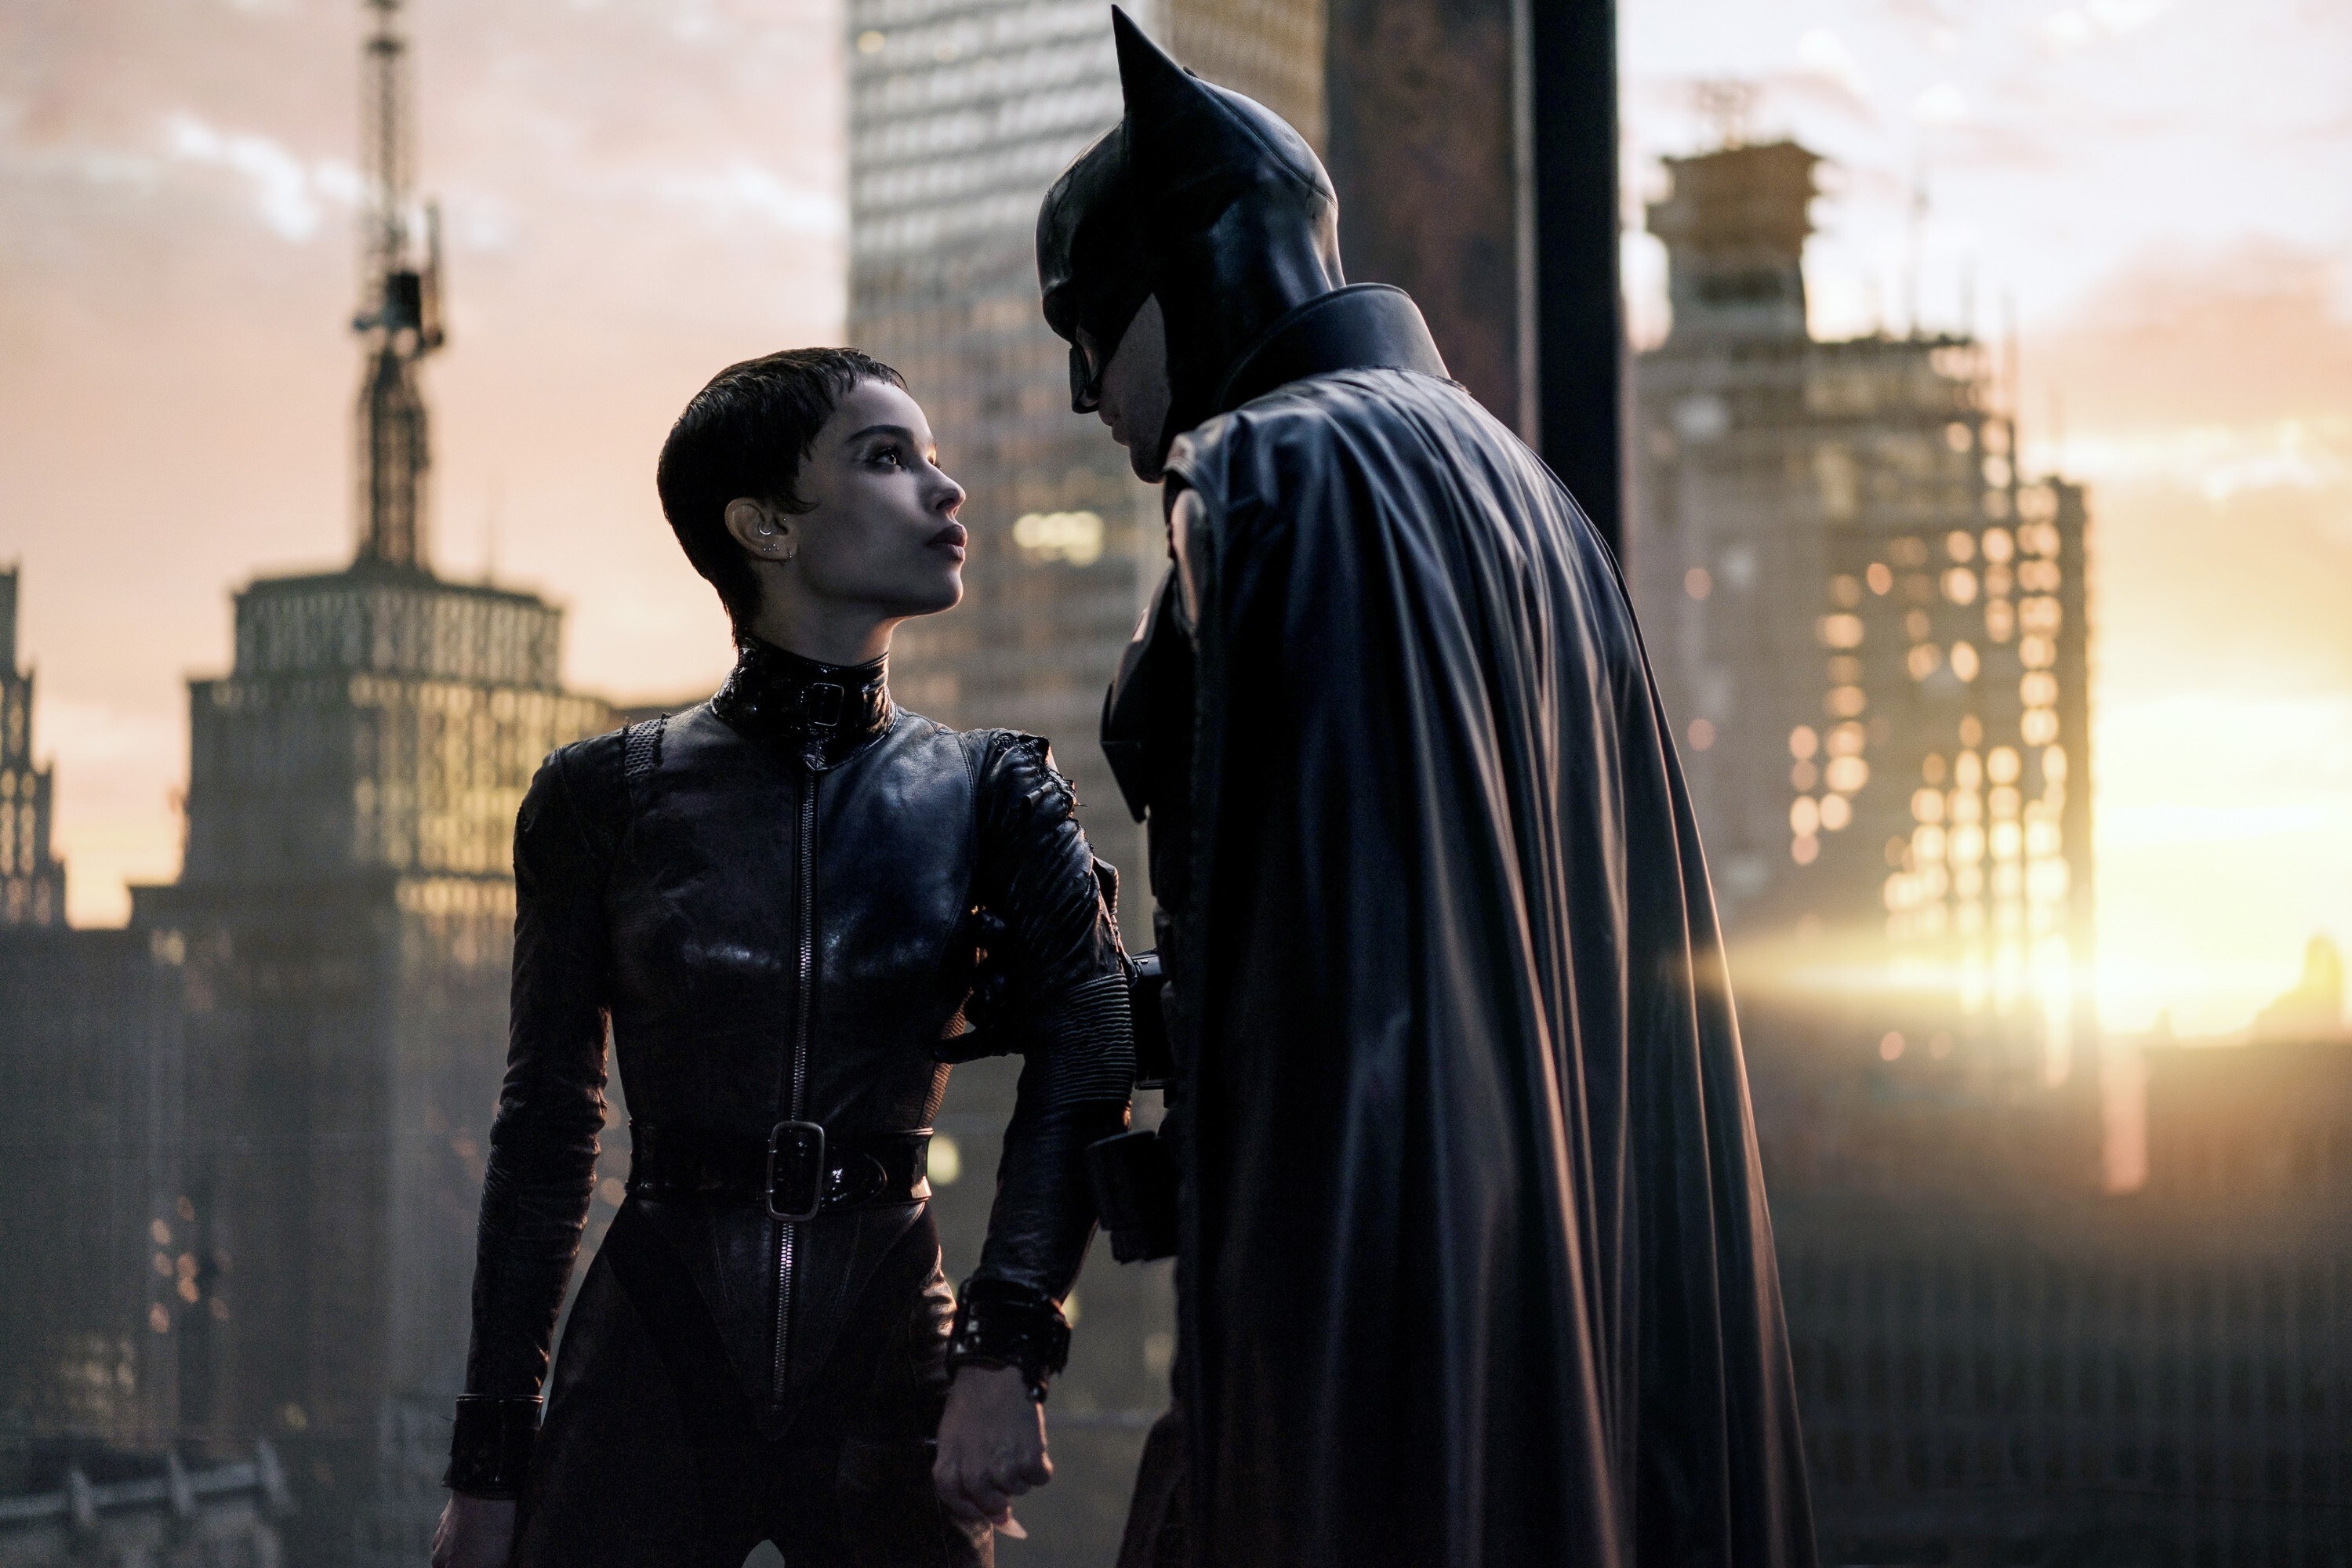 Zoe Kravitz and  Robert Pattinson as Catwoman and Batman staring each other down in front of the Gotham skyline